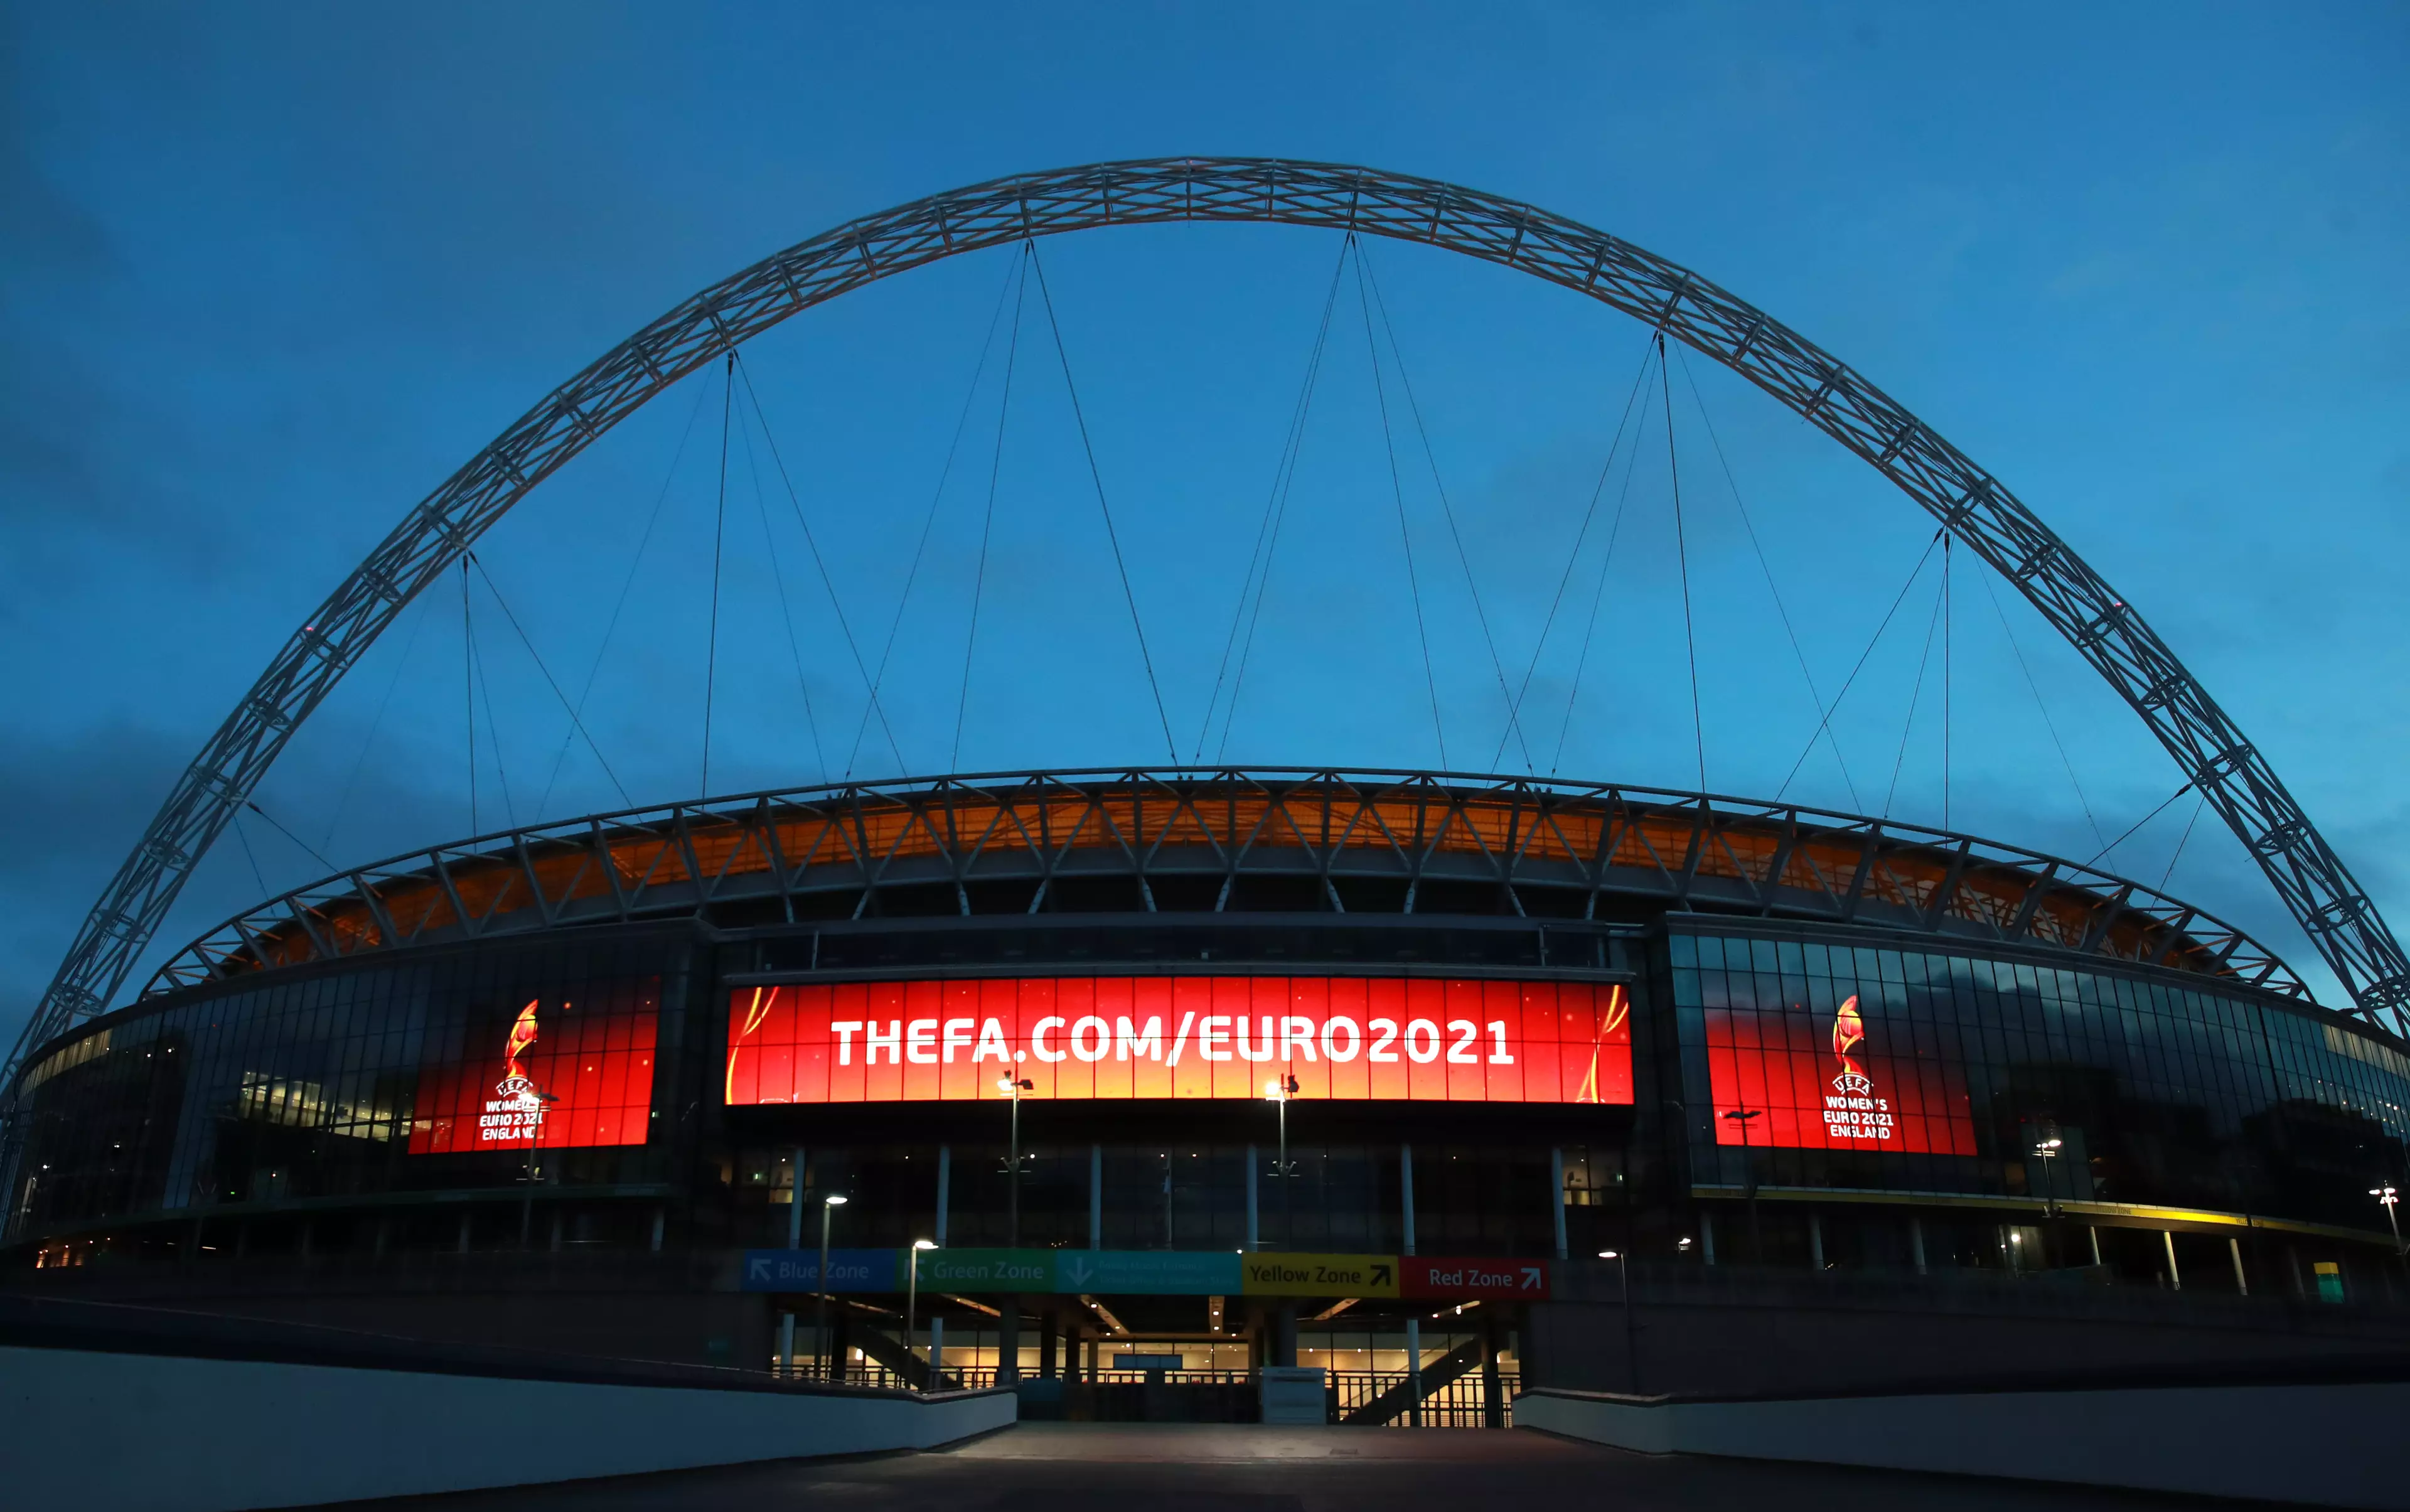 Wembley will host some matches at the Euros but will fans be back? Image: PA Images